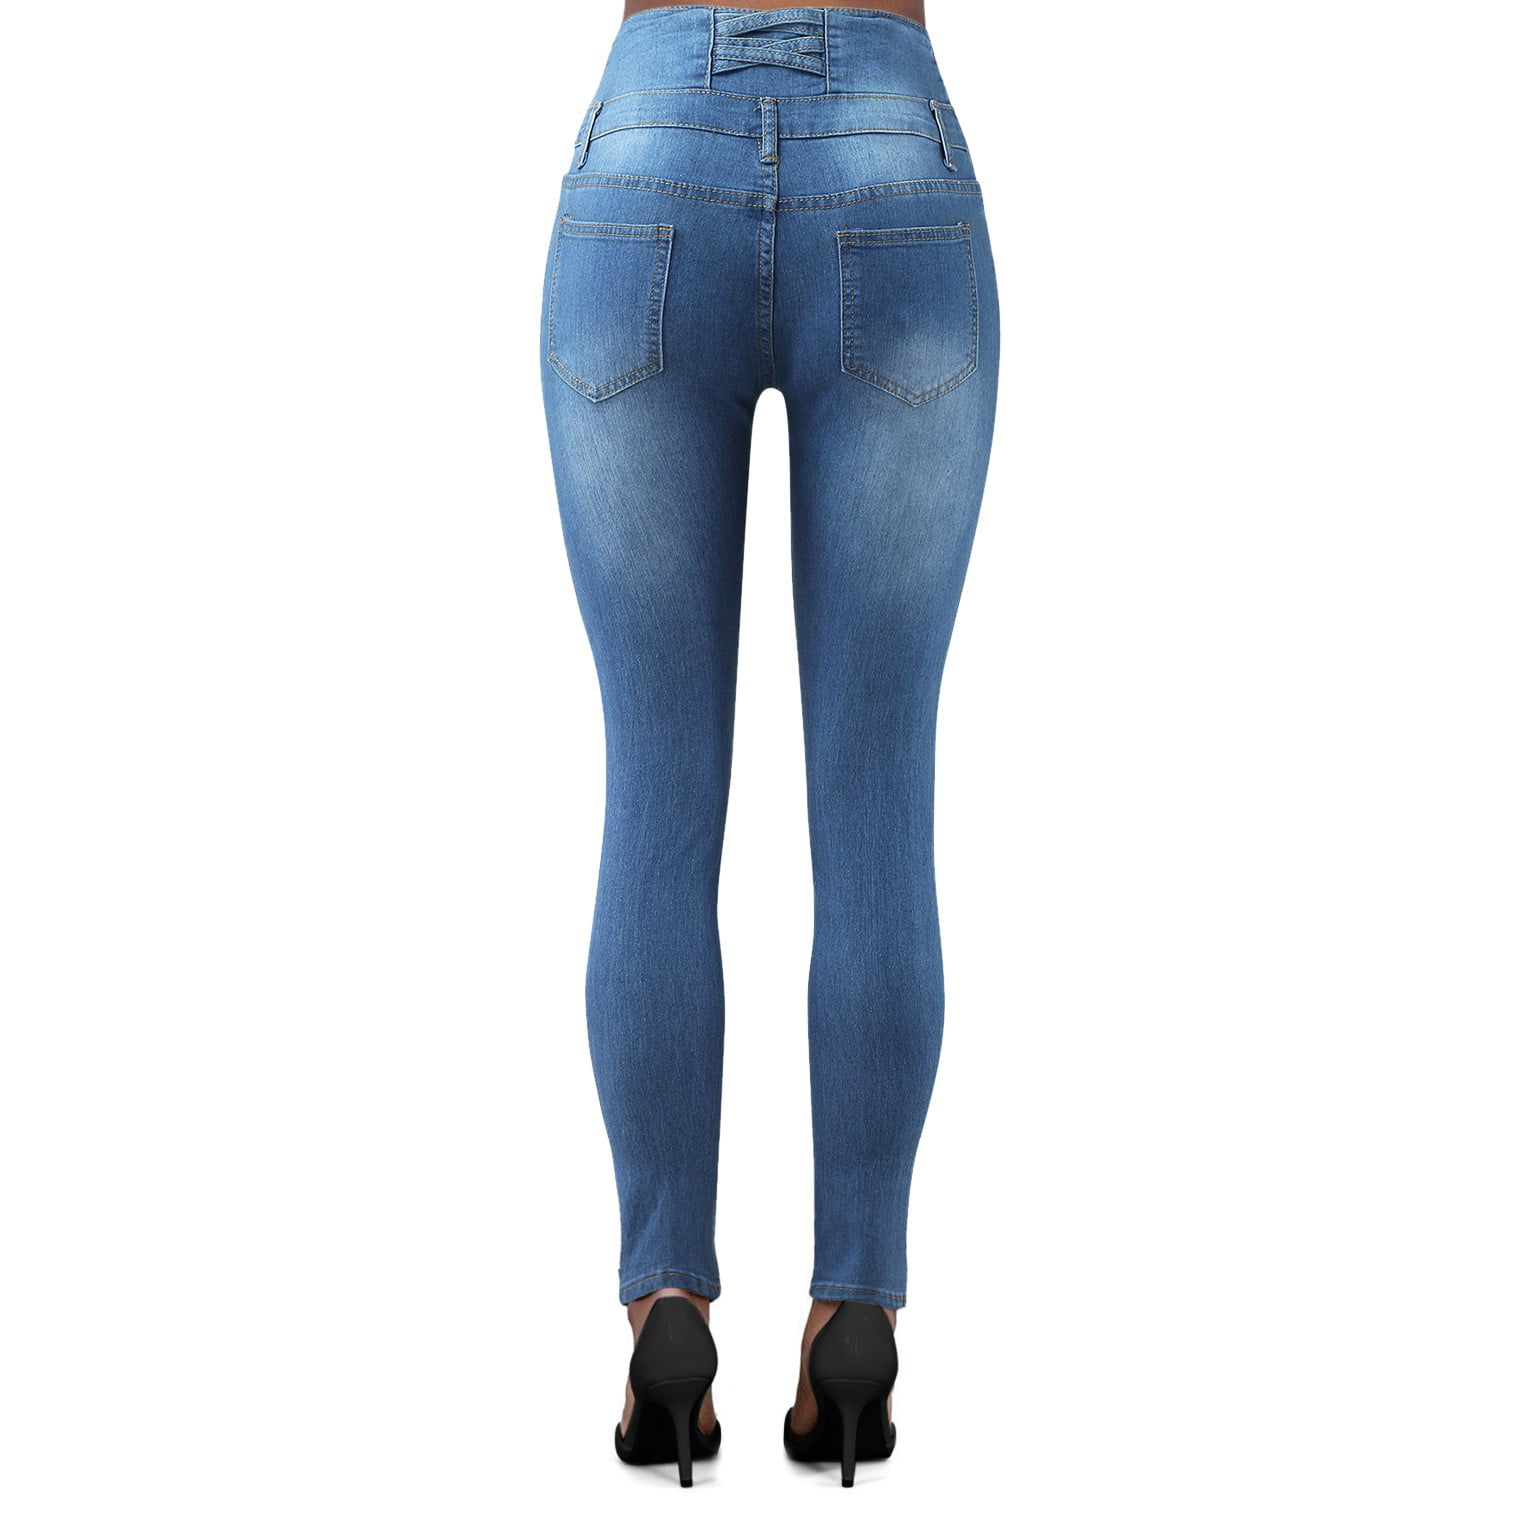 fvwitlyh Tummy Control Jeans for Women Jeans Women's Peri Pull On